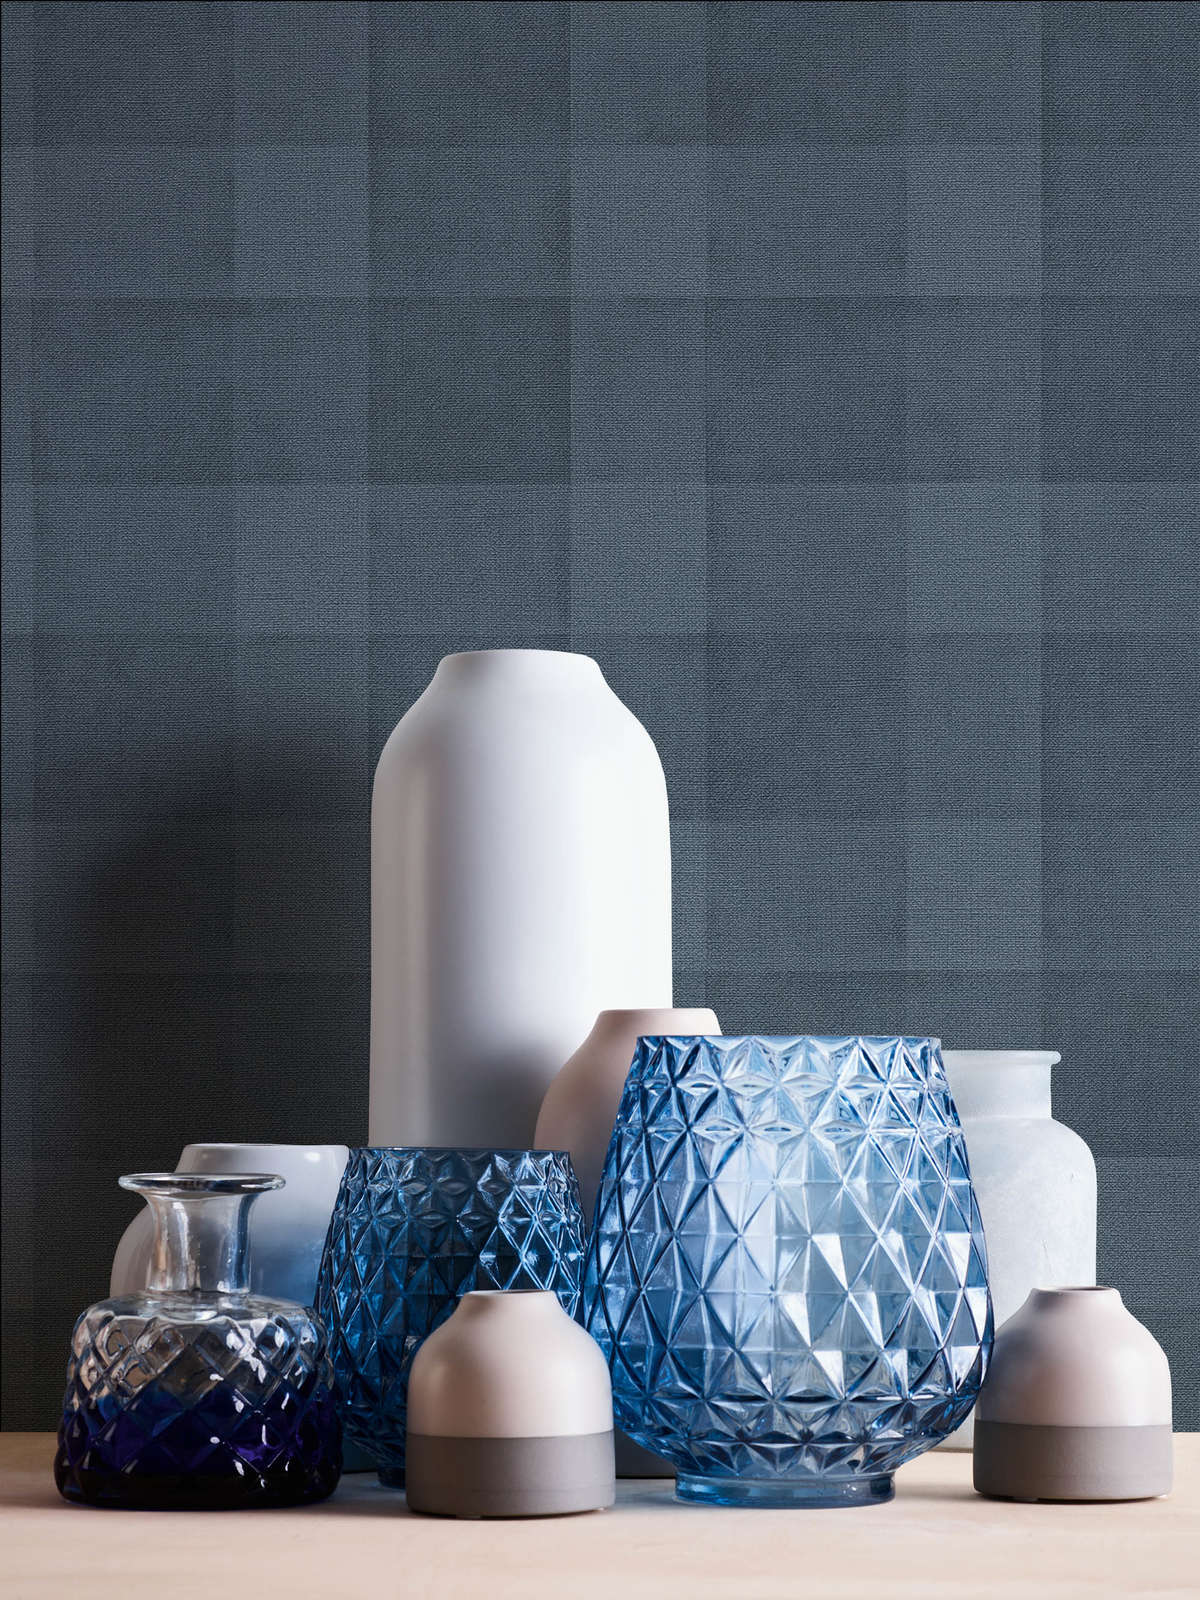             PVC-free wallpaper with graphic check pattern - blue
        